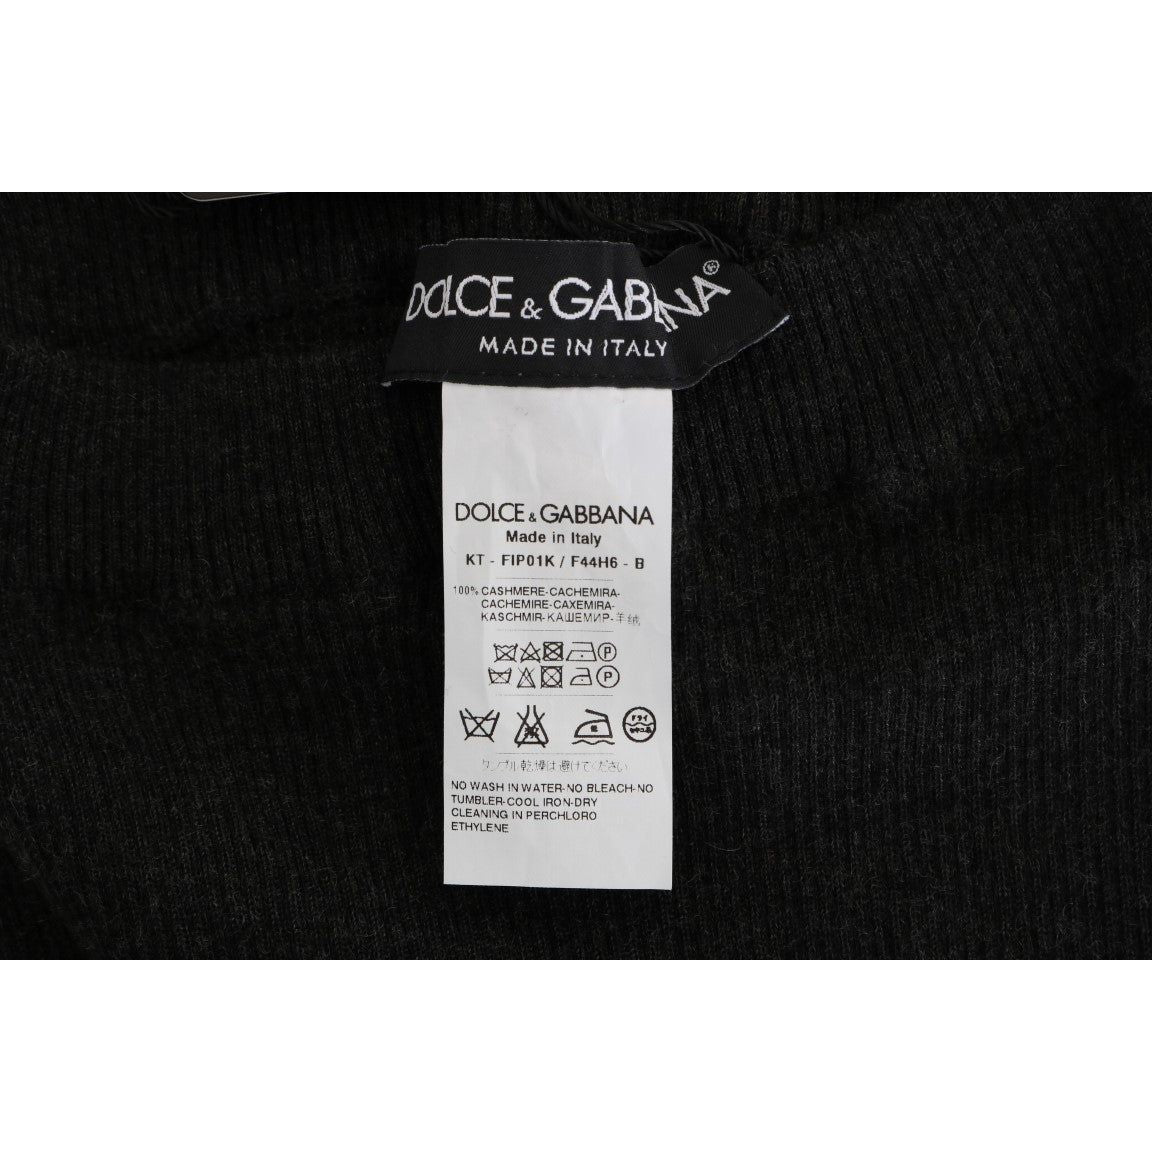 Dolce & Gabbana Elegant Gray Cashmere High Waist Pants gray-cashmere-ribbed-stretch-tights